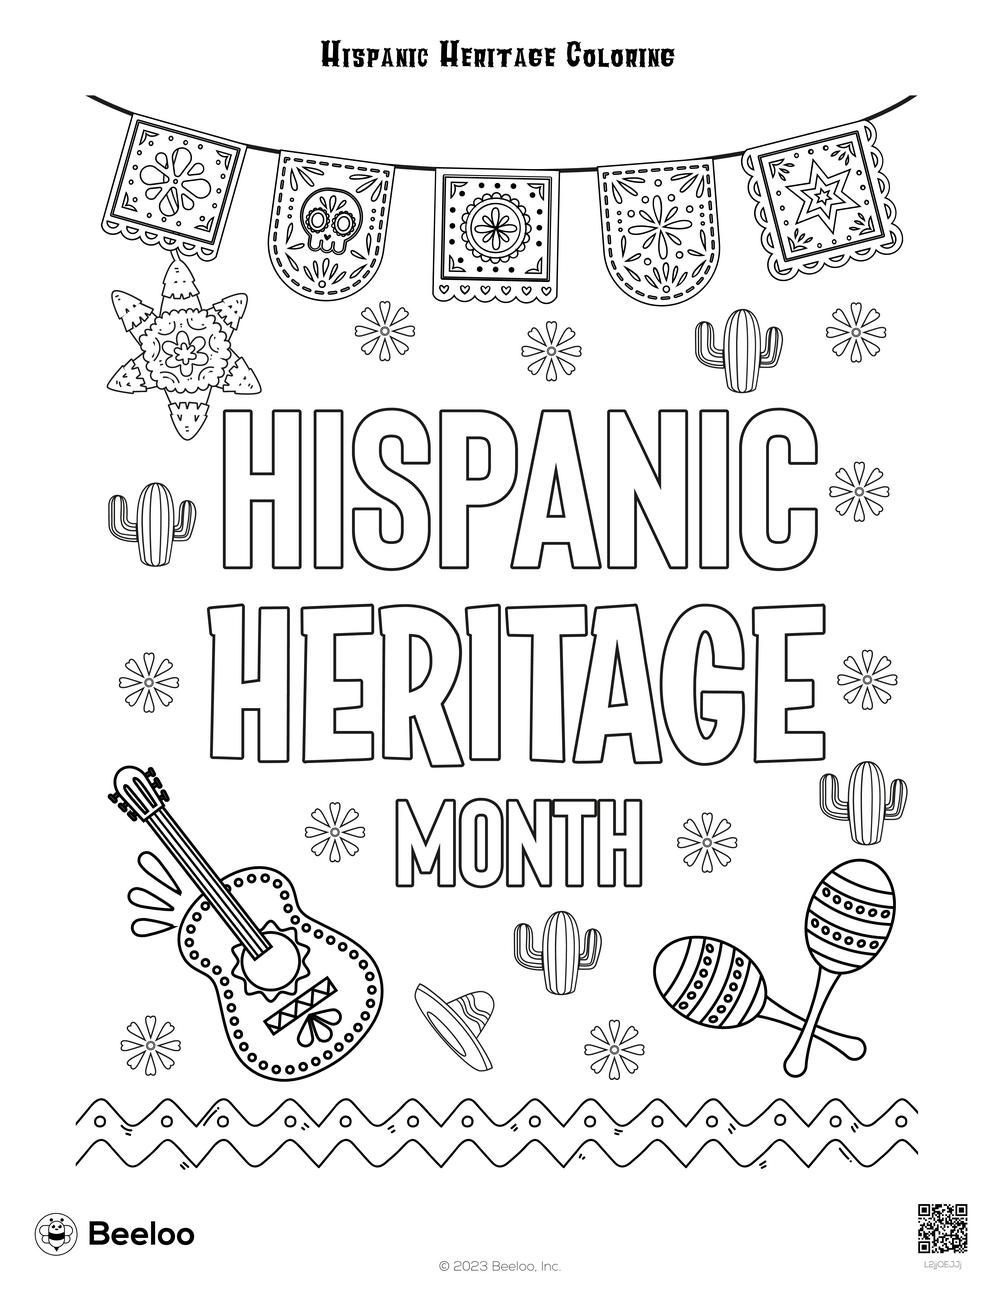 Hispanic heritage coloring â printable crafts and activities for kids